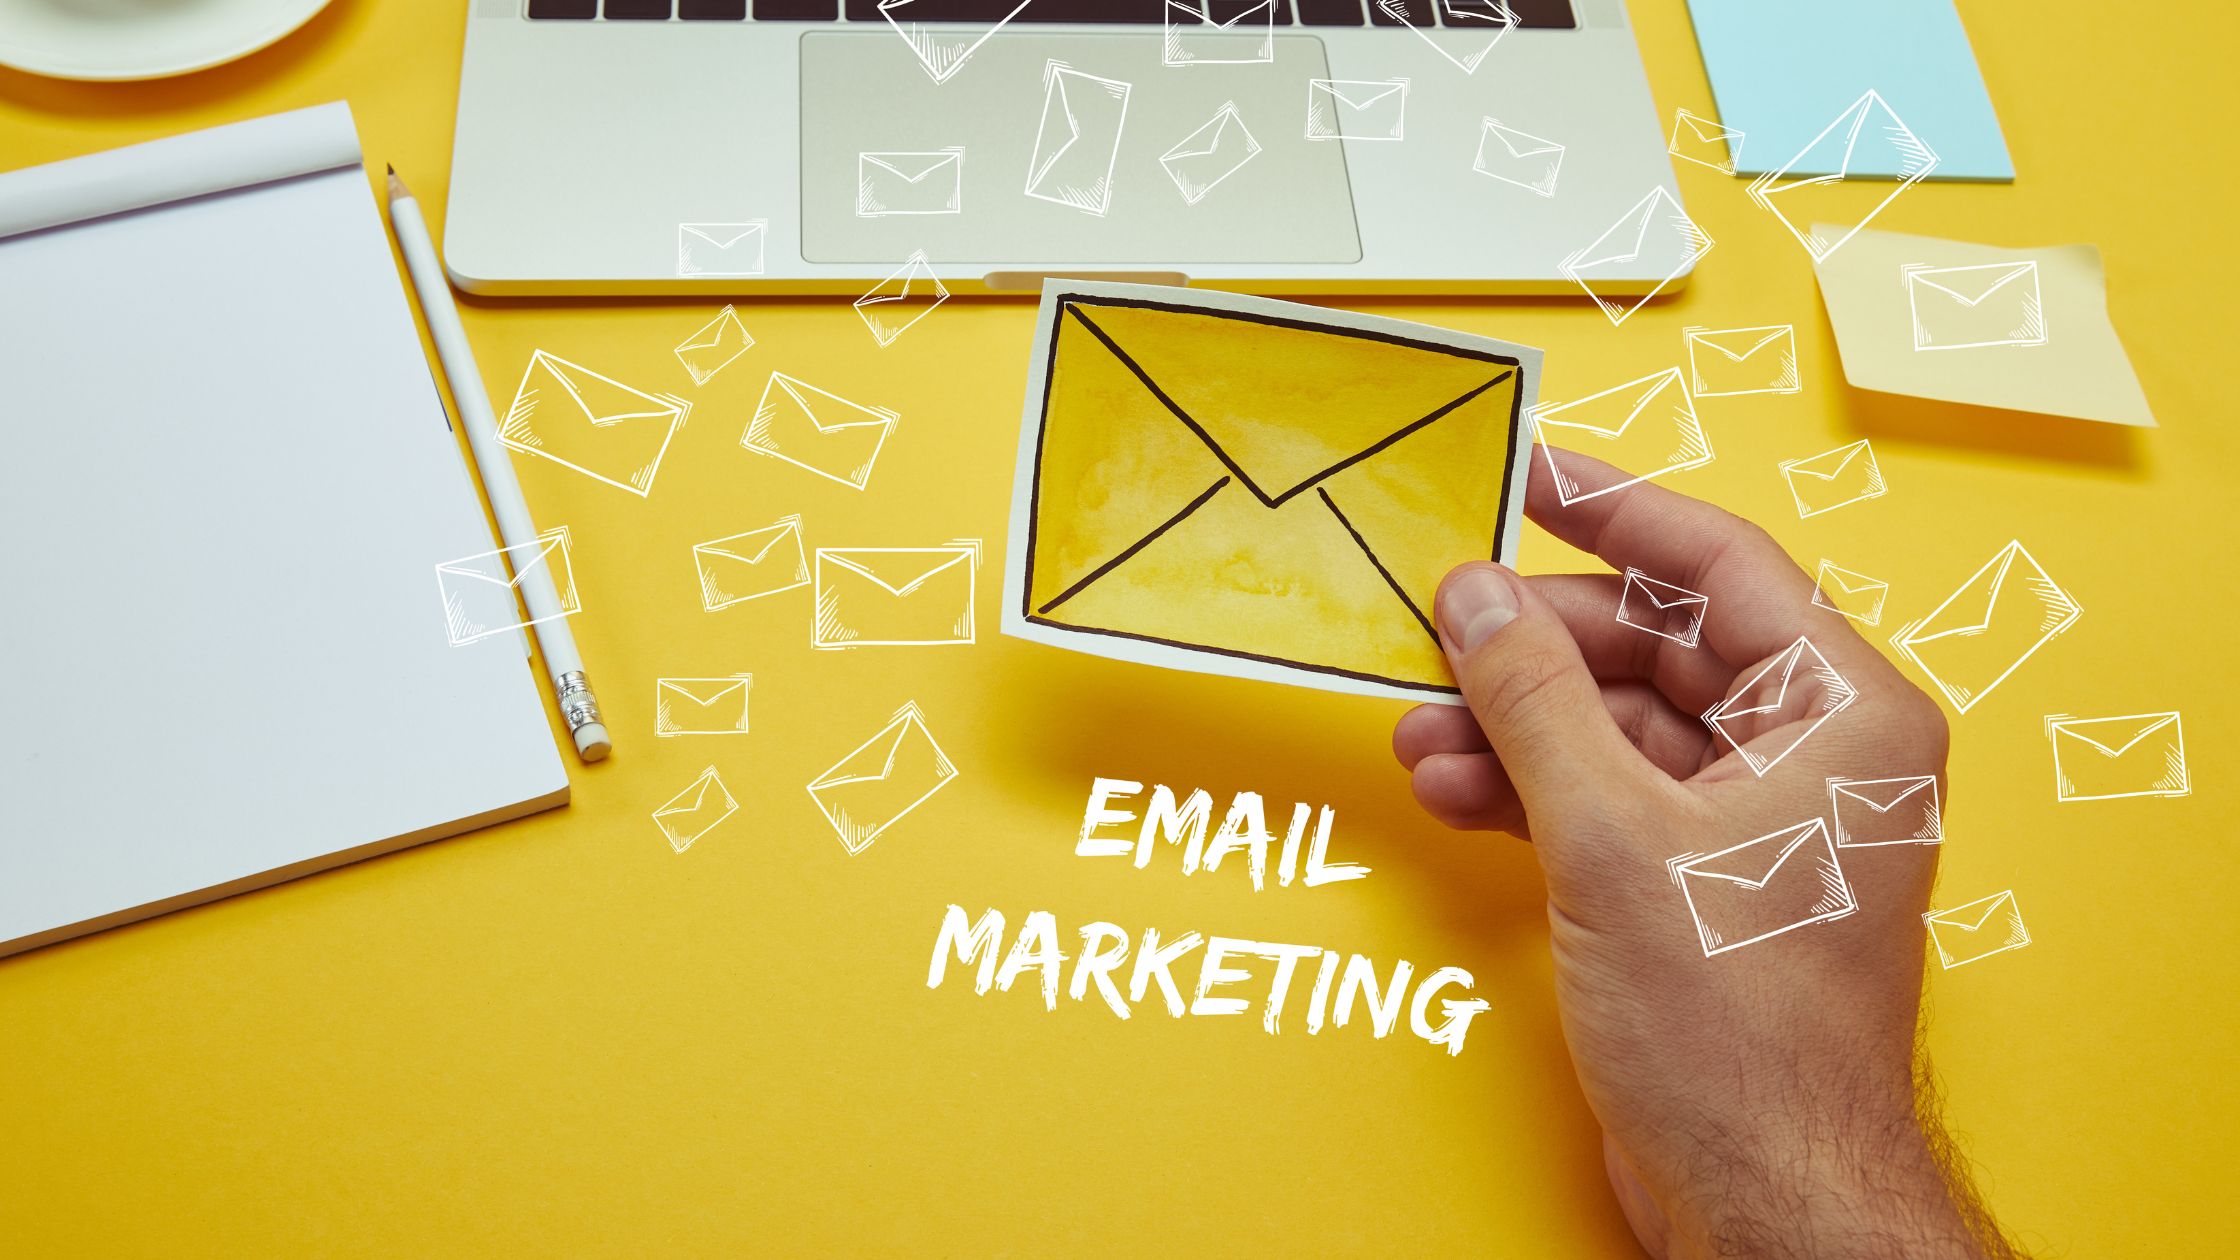 Top Marketing Tools To Boost Your Business - Email Marketing